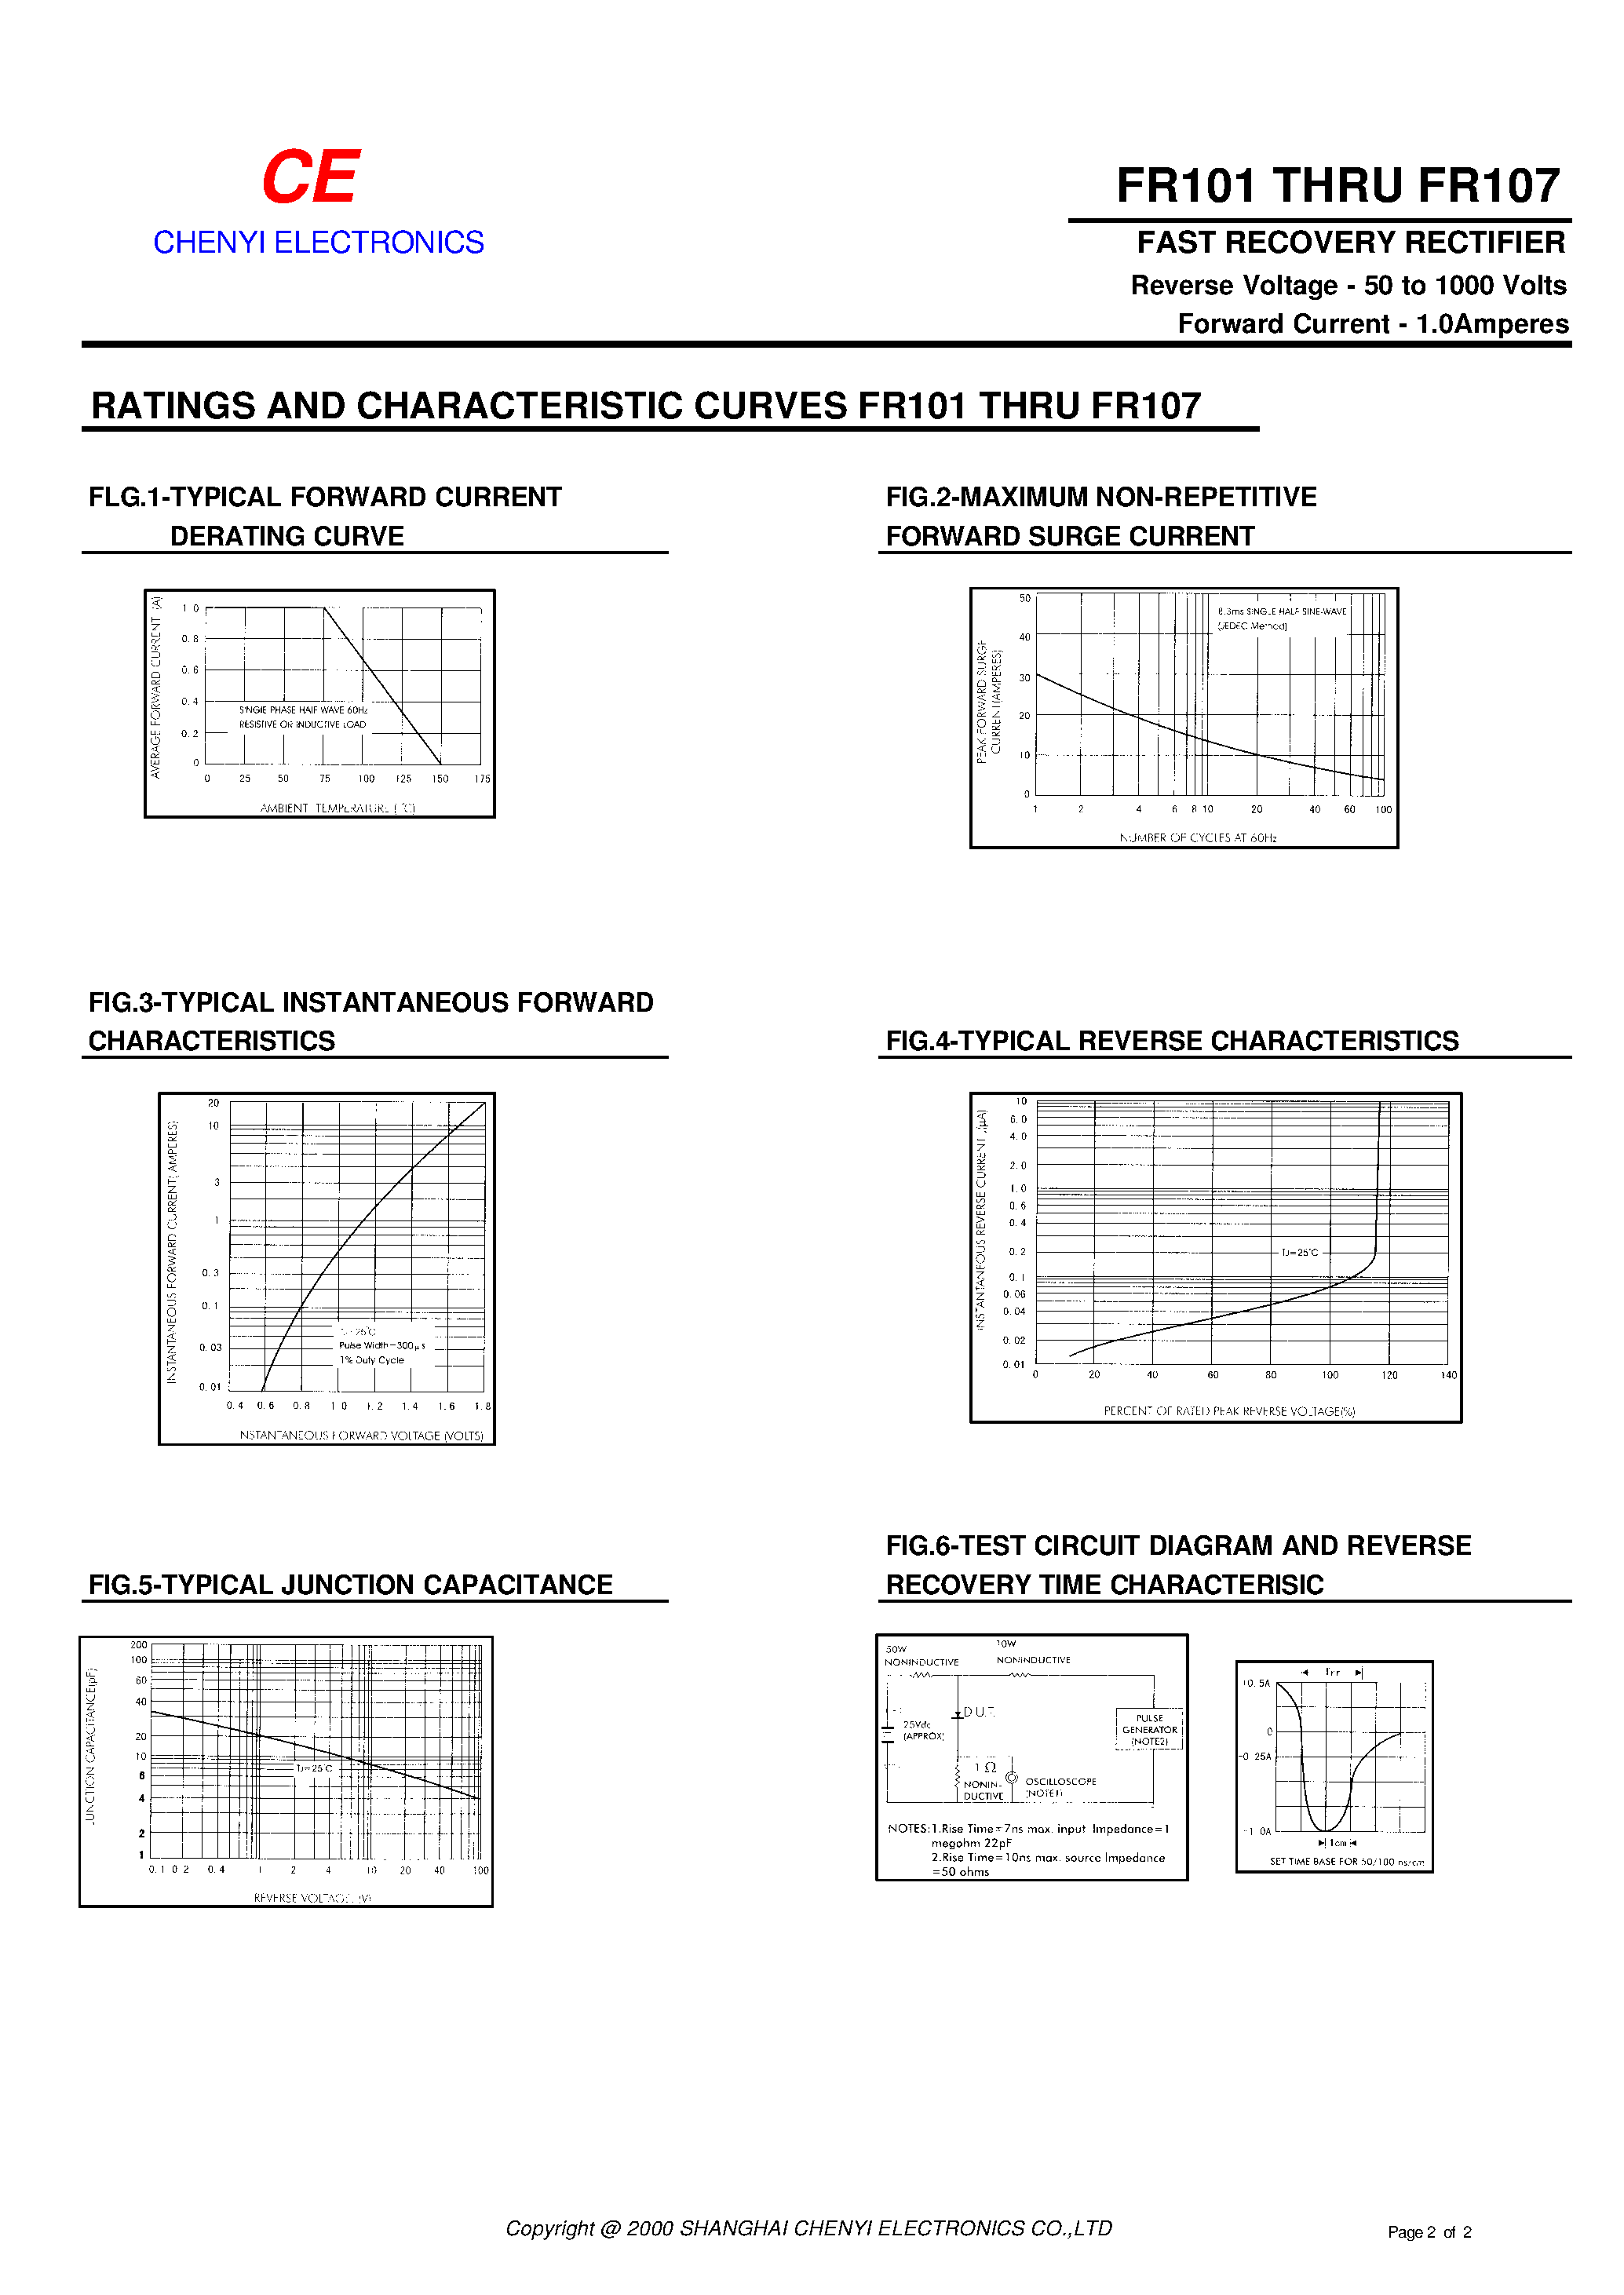 Datasheet FR101 - FAST RECOVERY RECTIFIER page 2